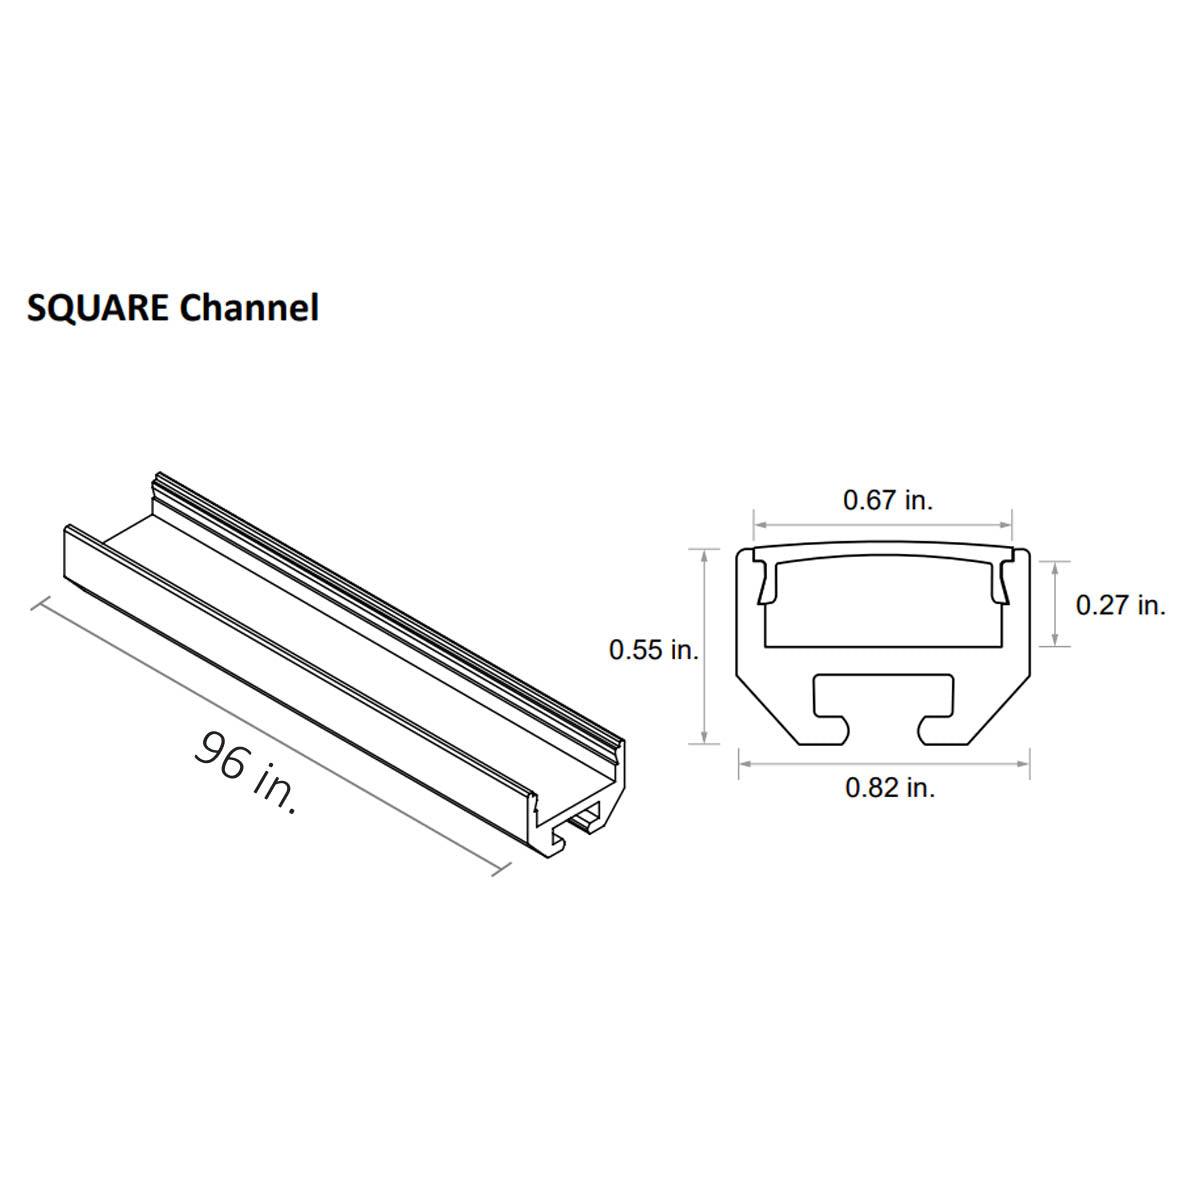 96in. Chromapath Builder, Square White LED Channels for 12mm strip lights, Pack of 10 - Bees Lighting